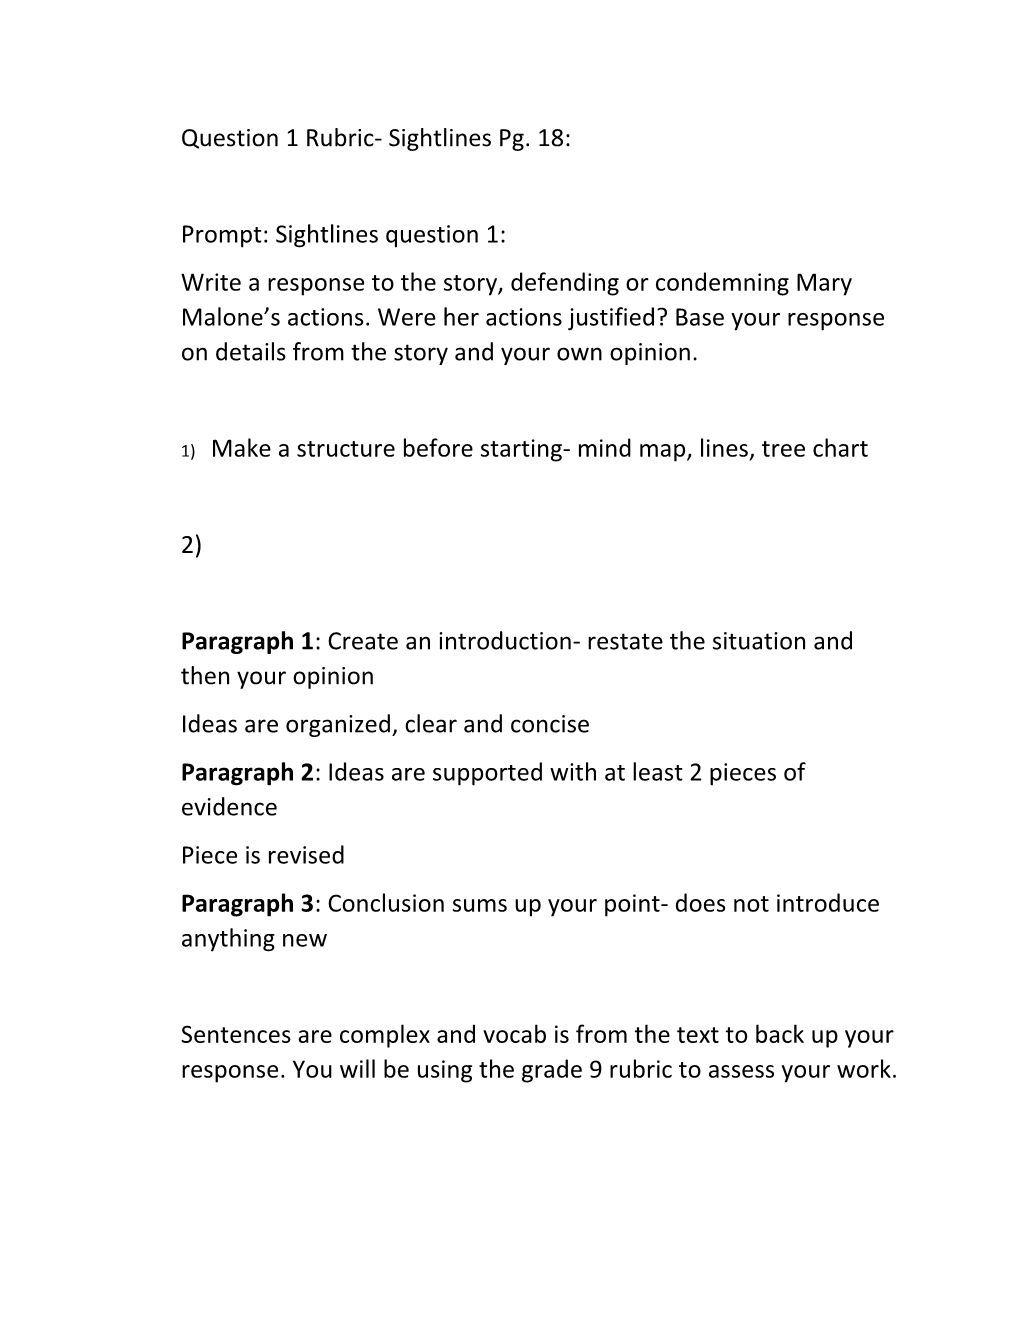 Question 1 Rubric- Sightlines Pg. 18